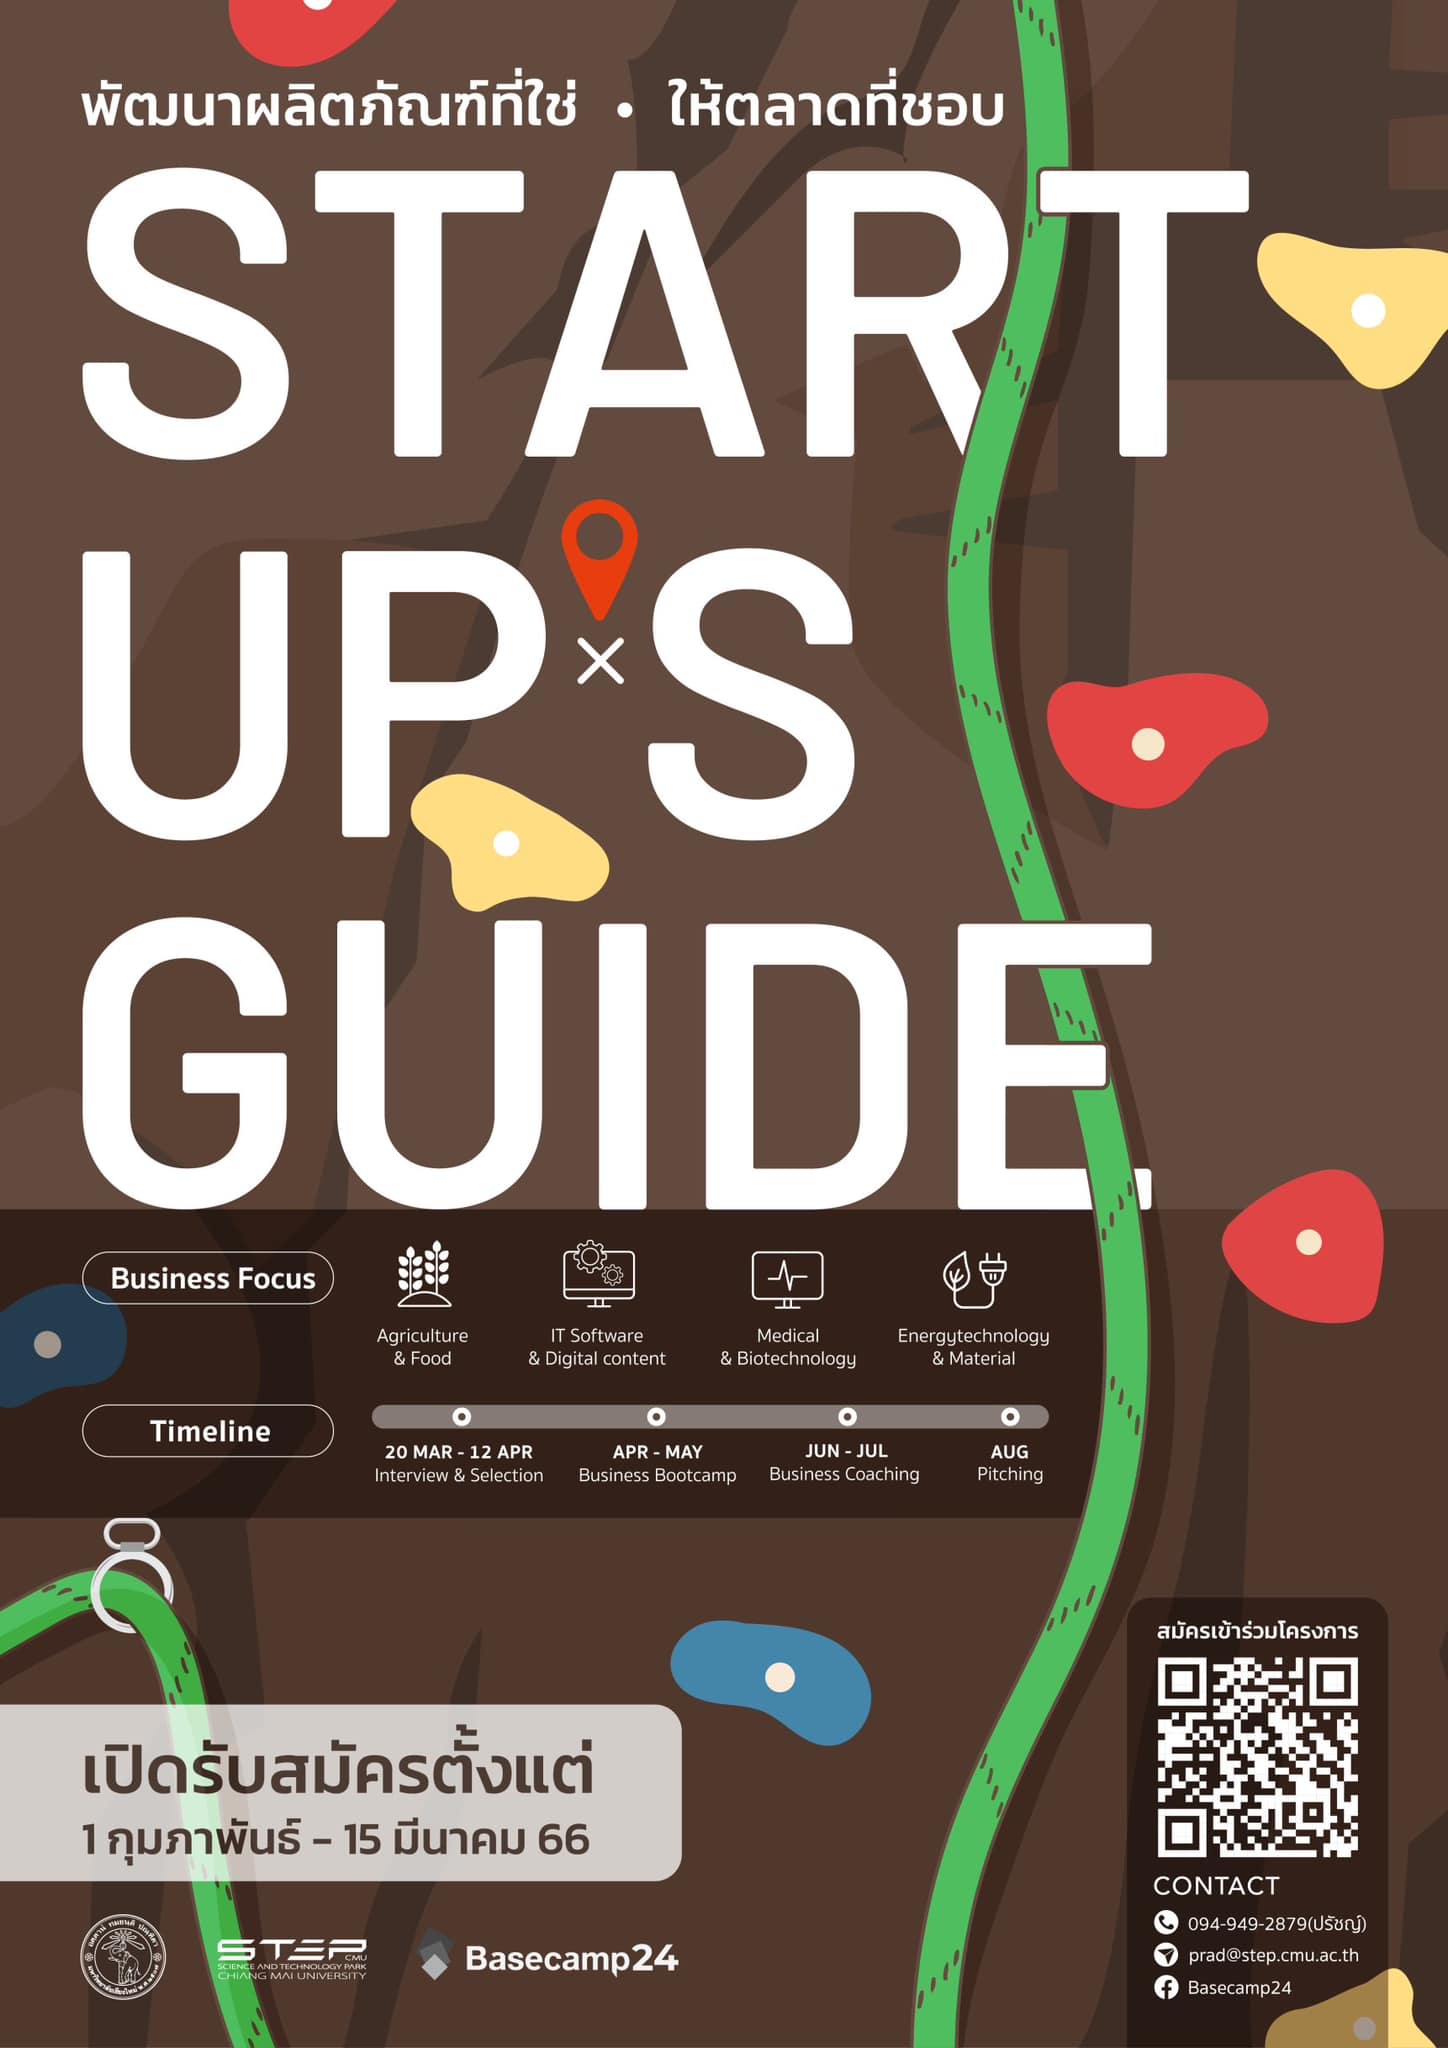 Startup’s guide